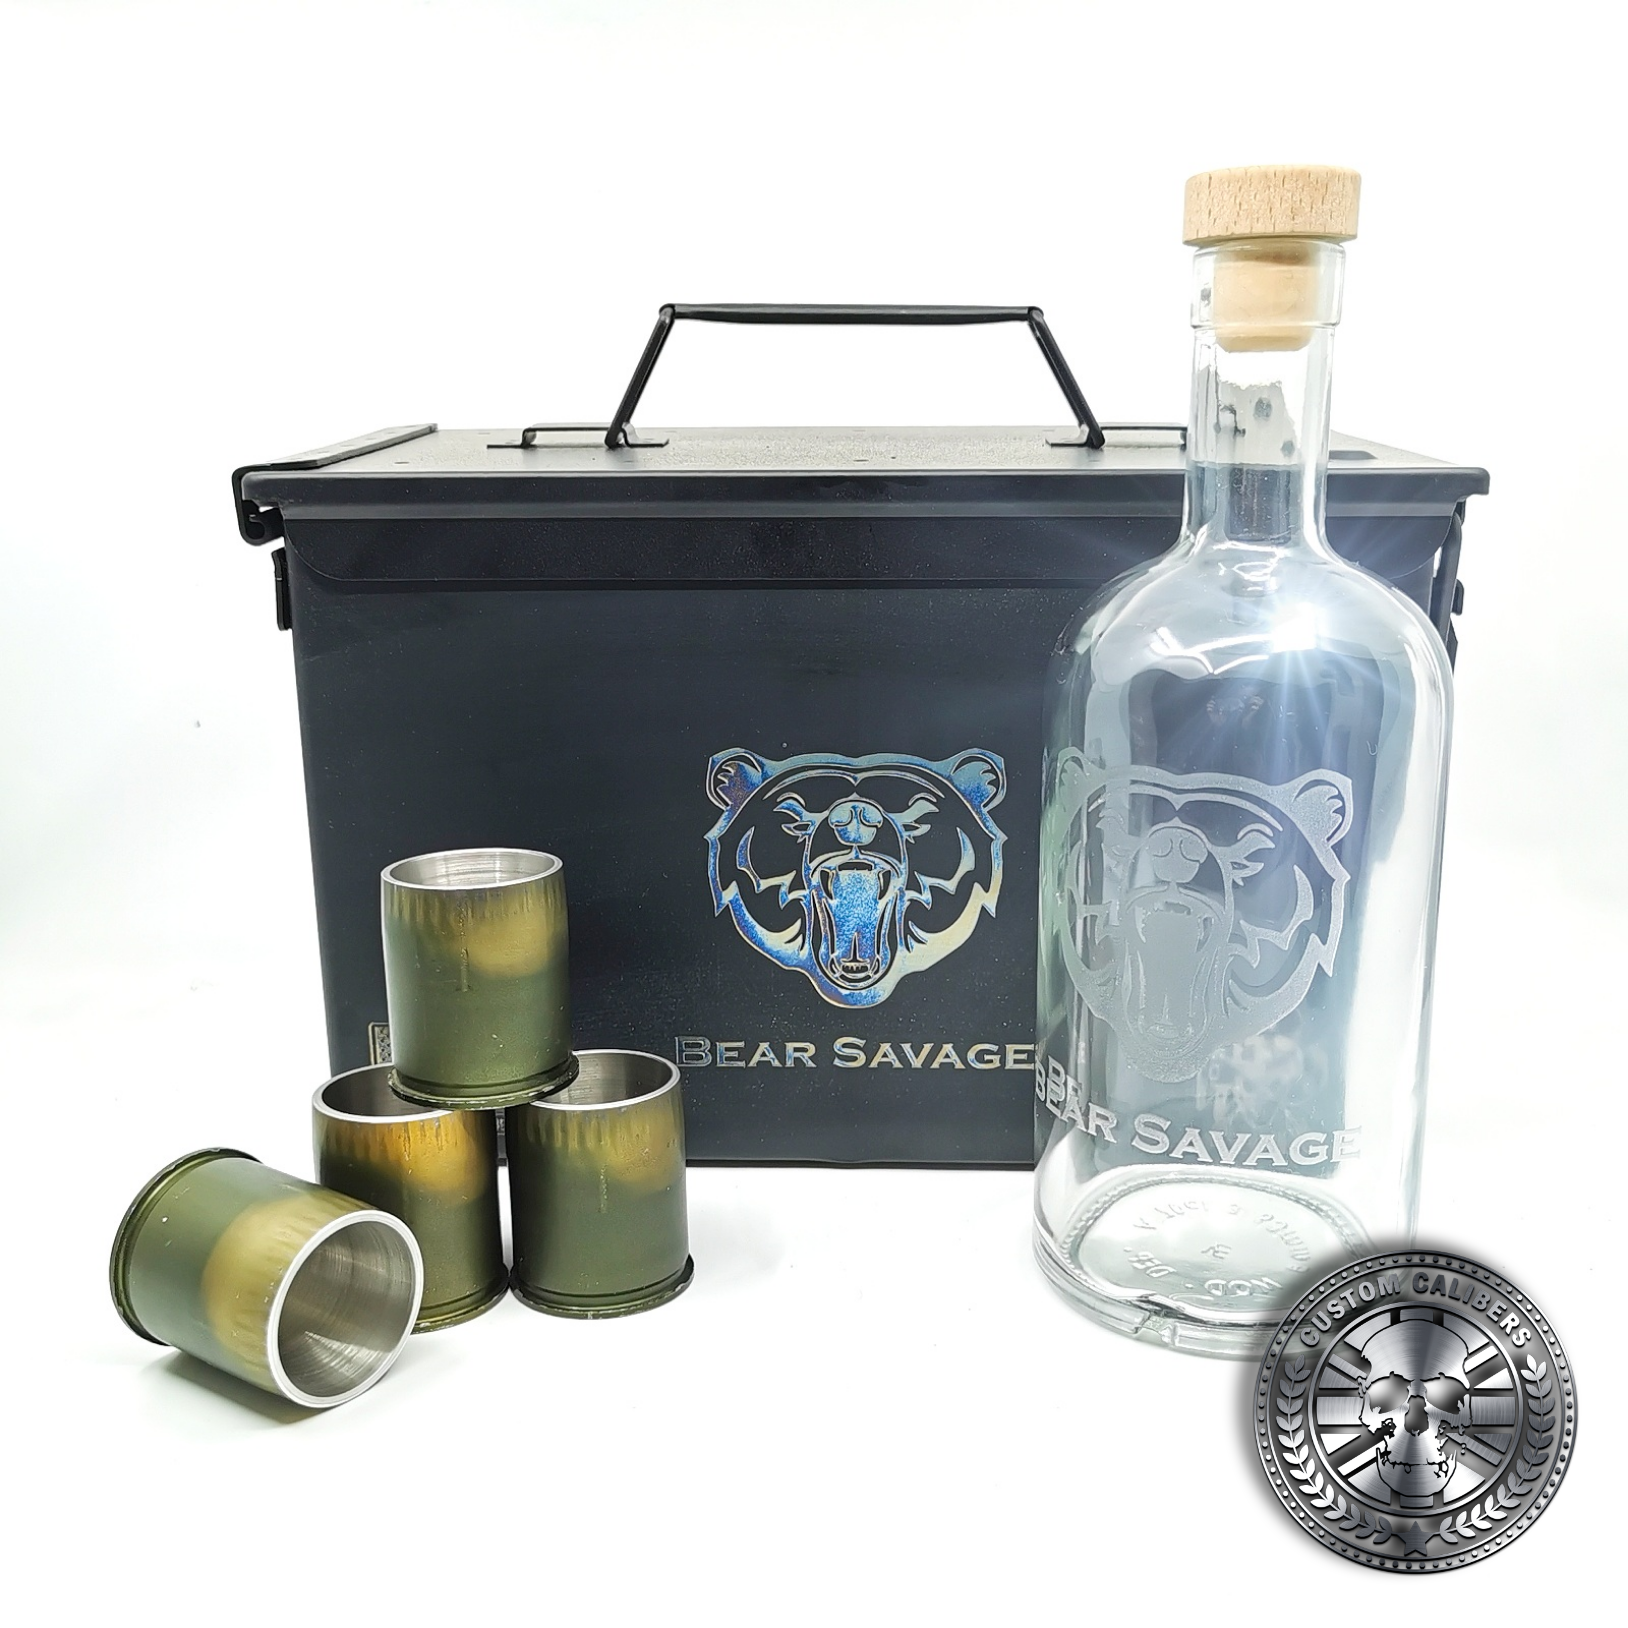 another shot of the MK19 GMG grenade gift set showing a whisky bottle and four grenade shot glasses